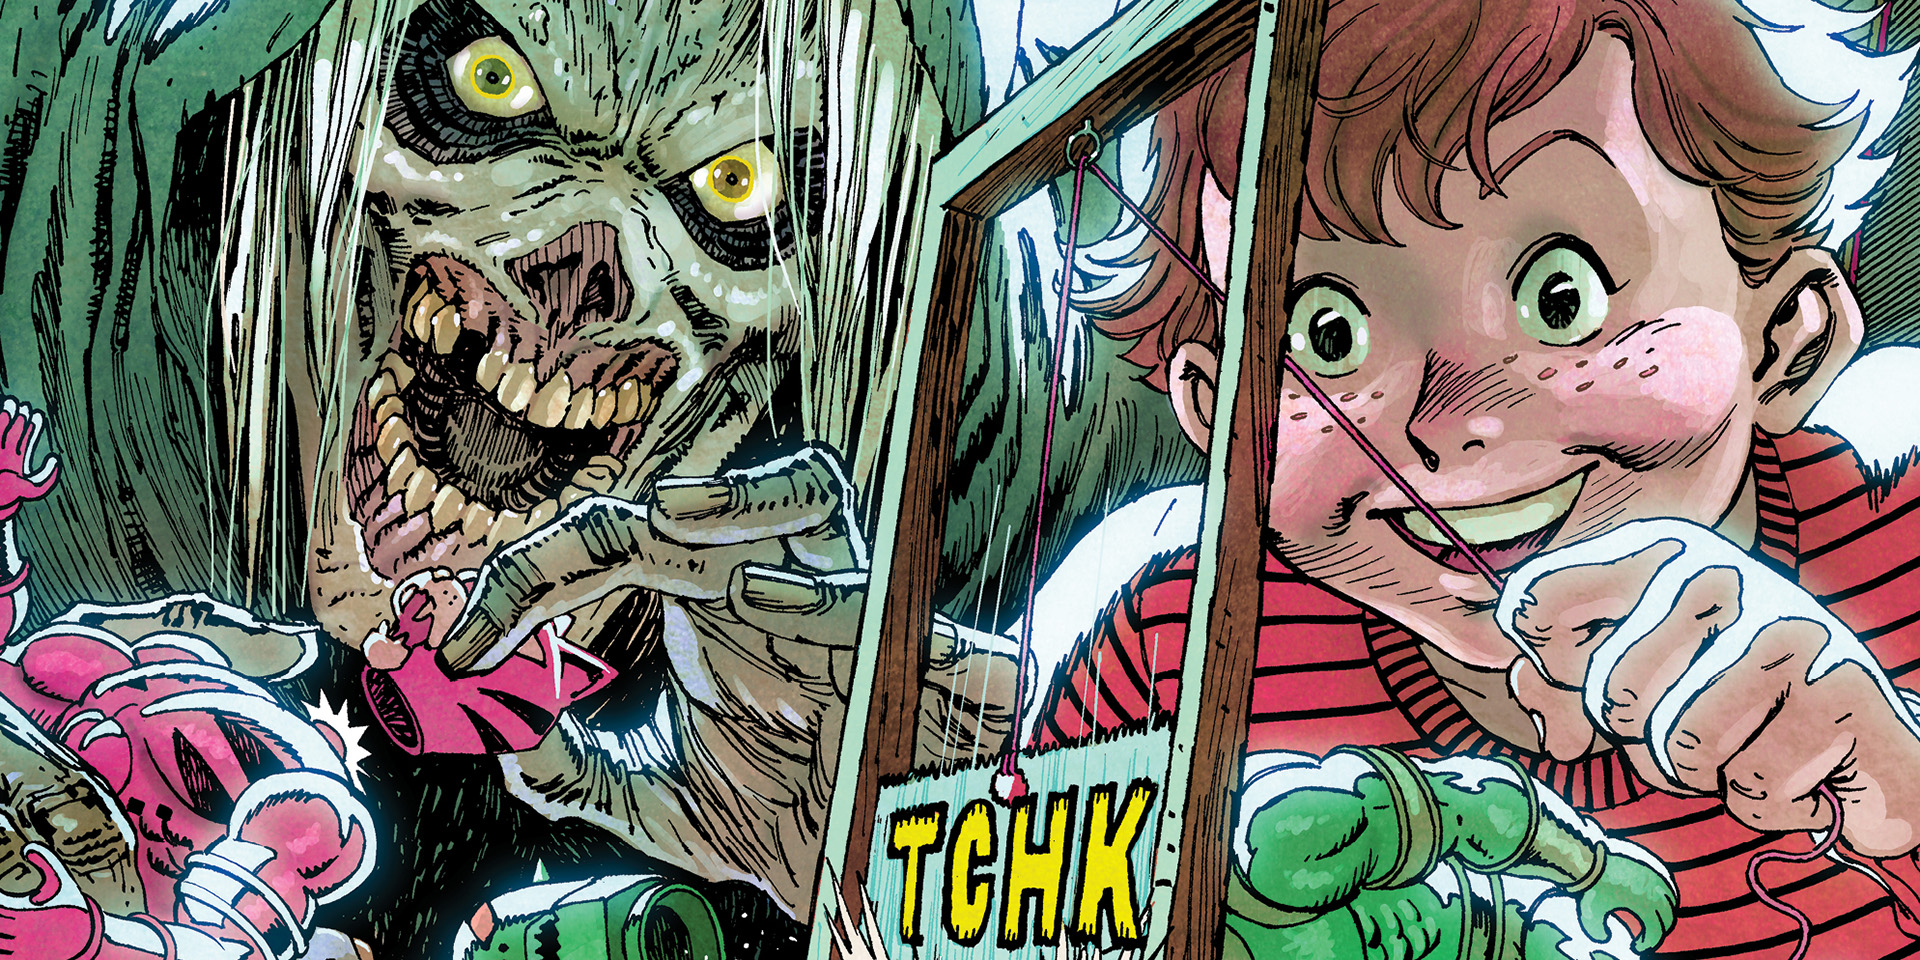 FIRST LOOK AT CREEPSHOW VOL. 2 #5!